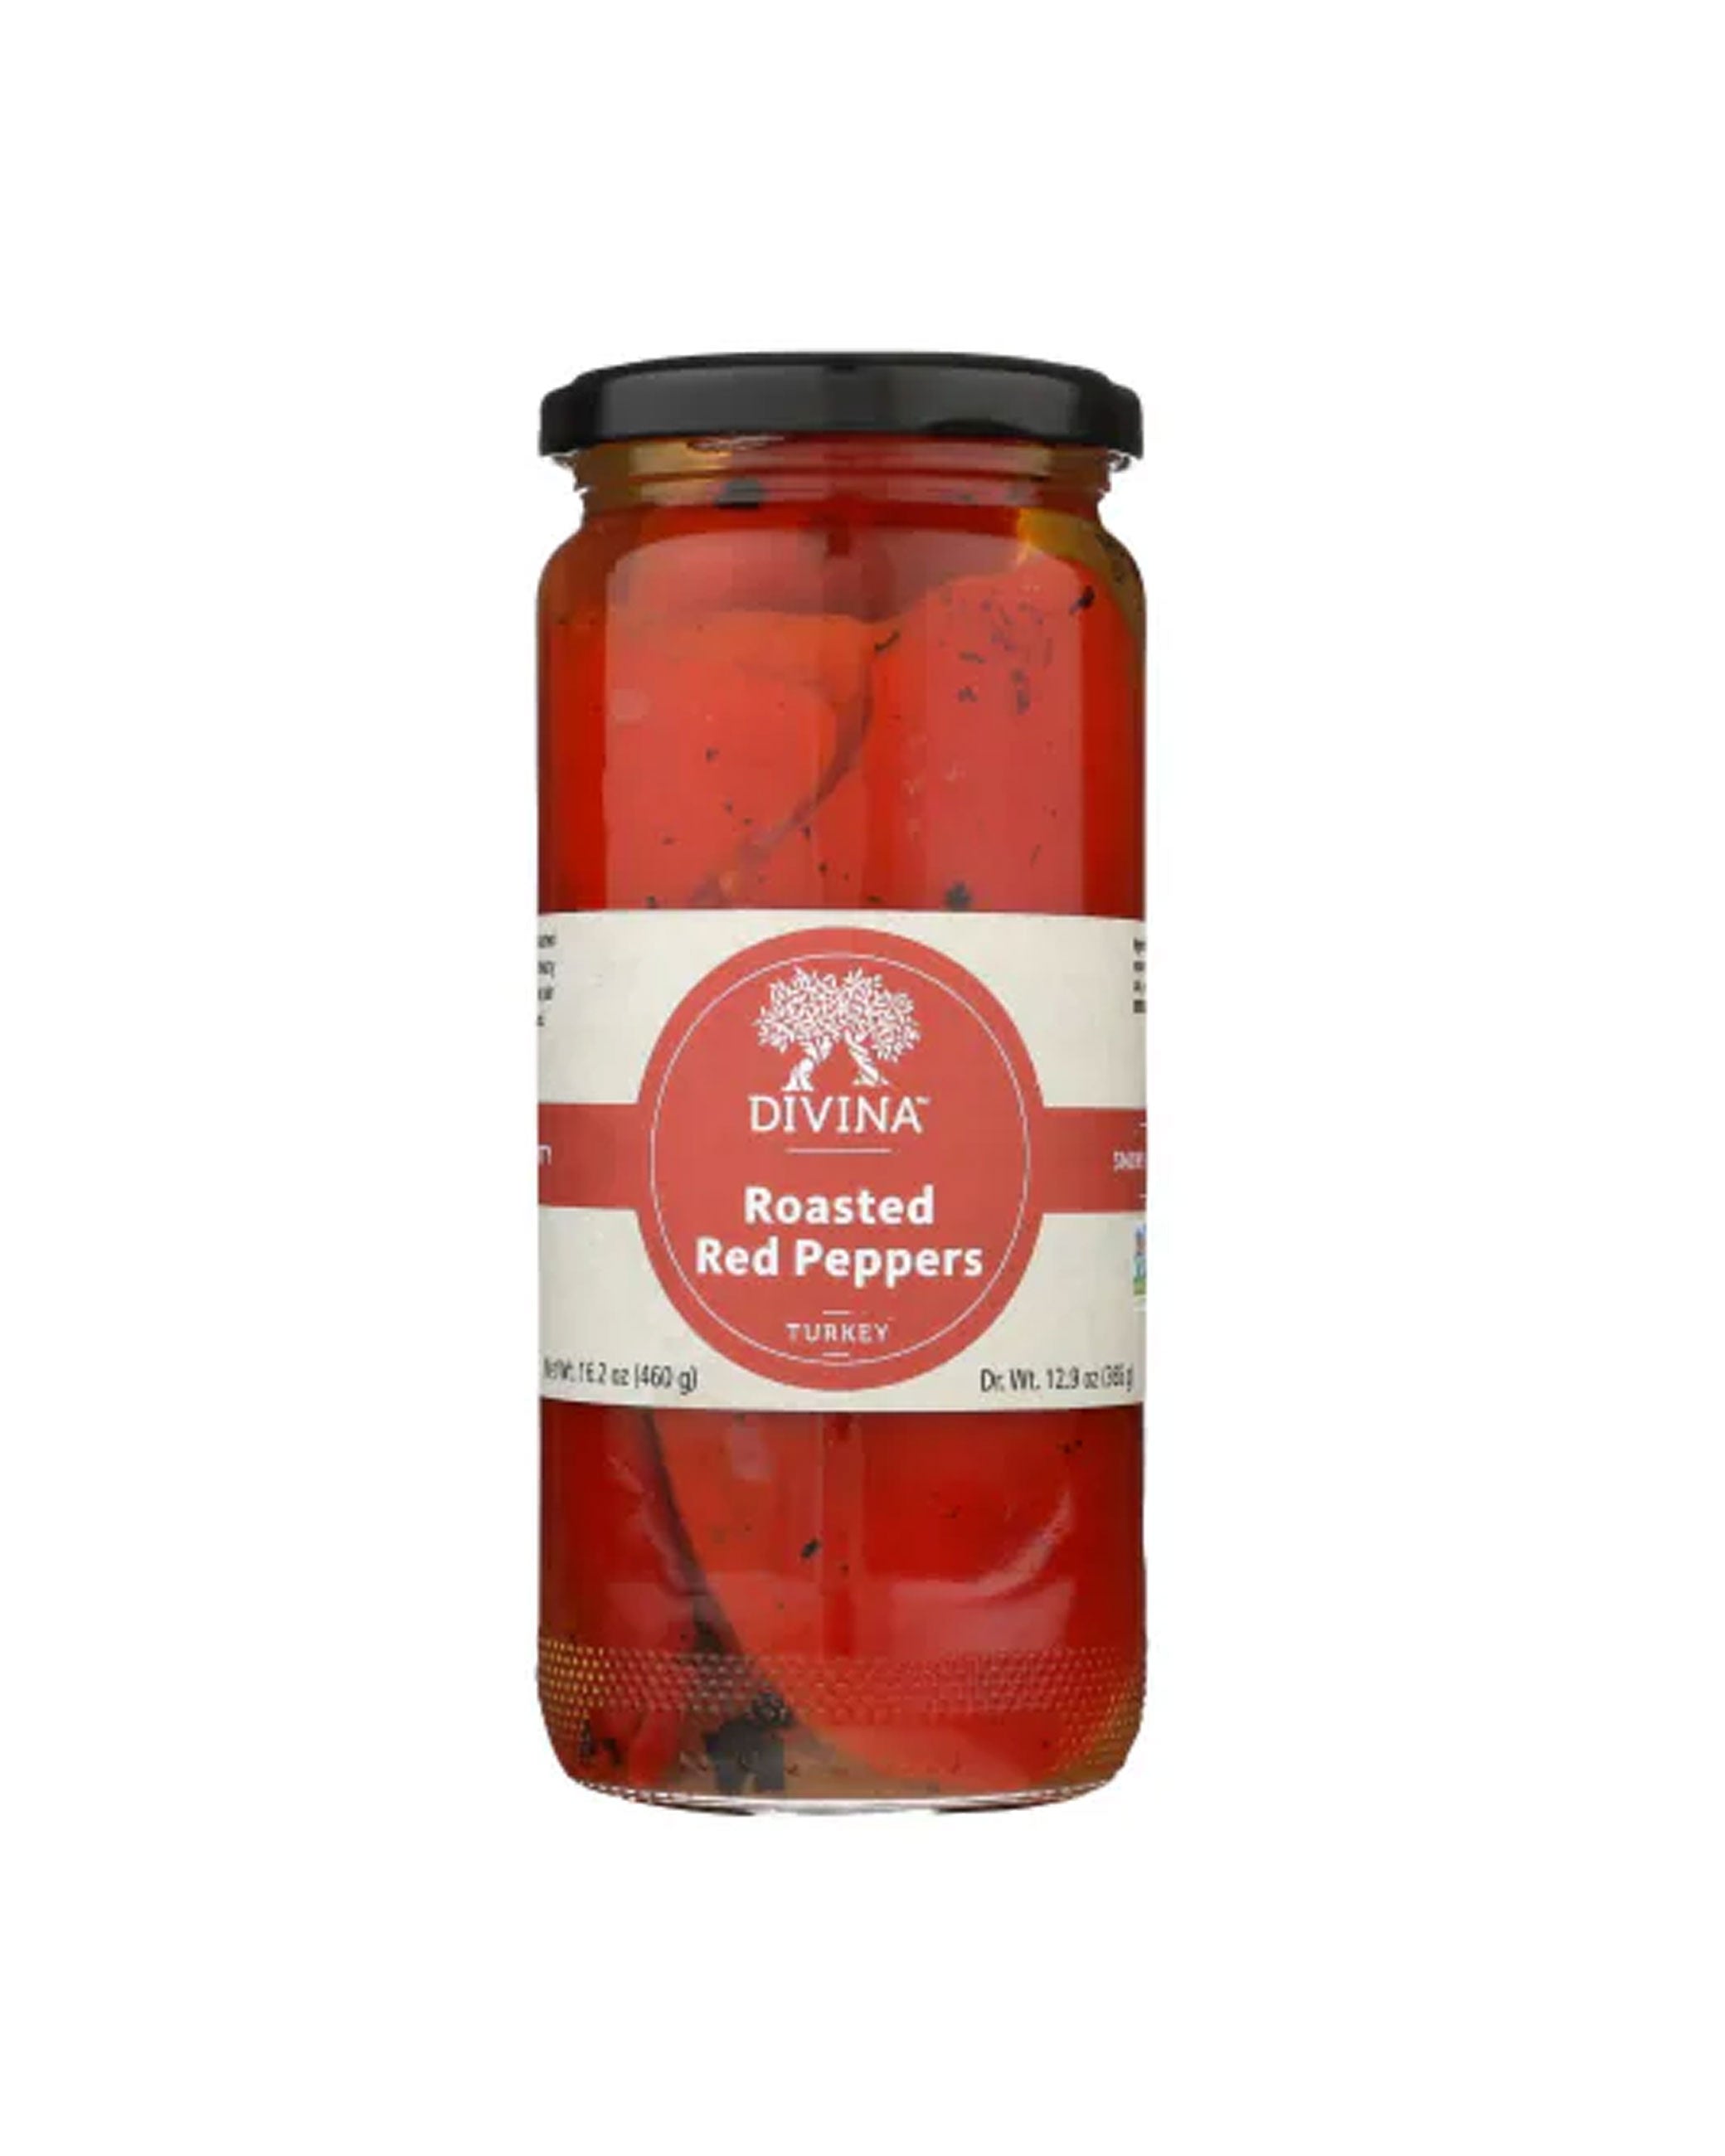 Roasted Red Peppers - Olive Oil Etcetera - Bucks county's gourmet olive oil and vinegar shop